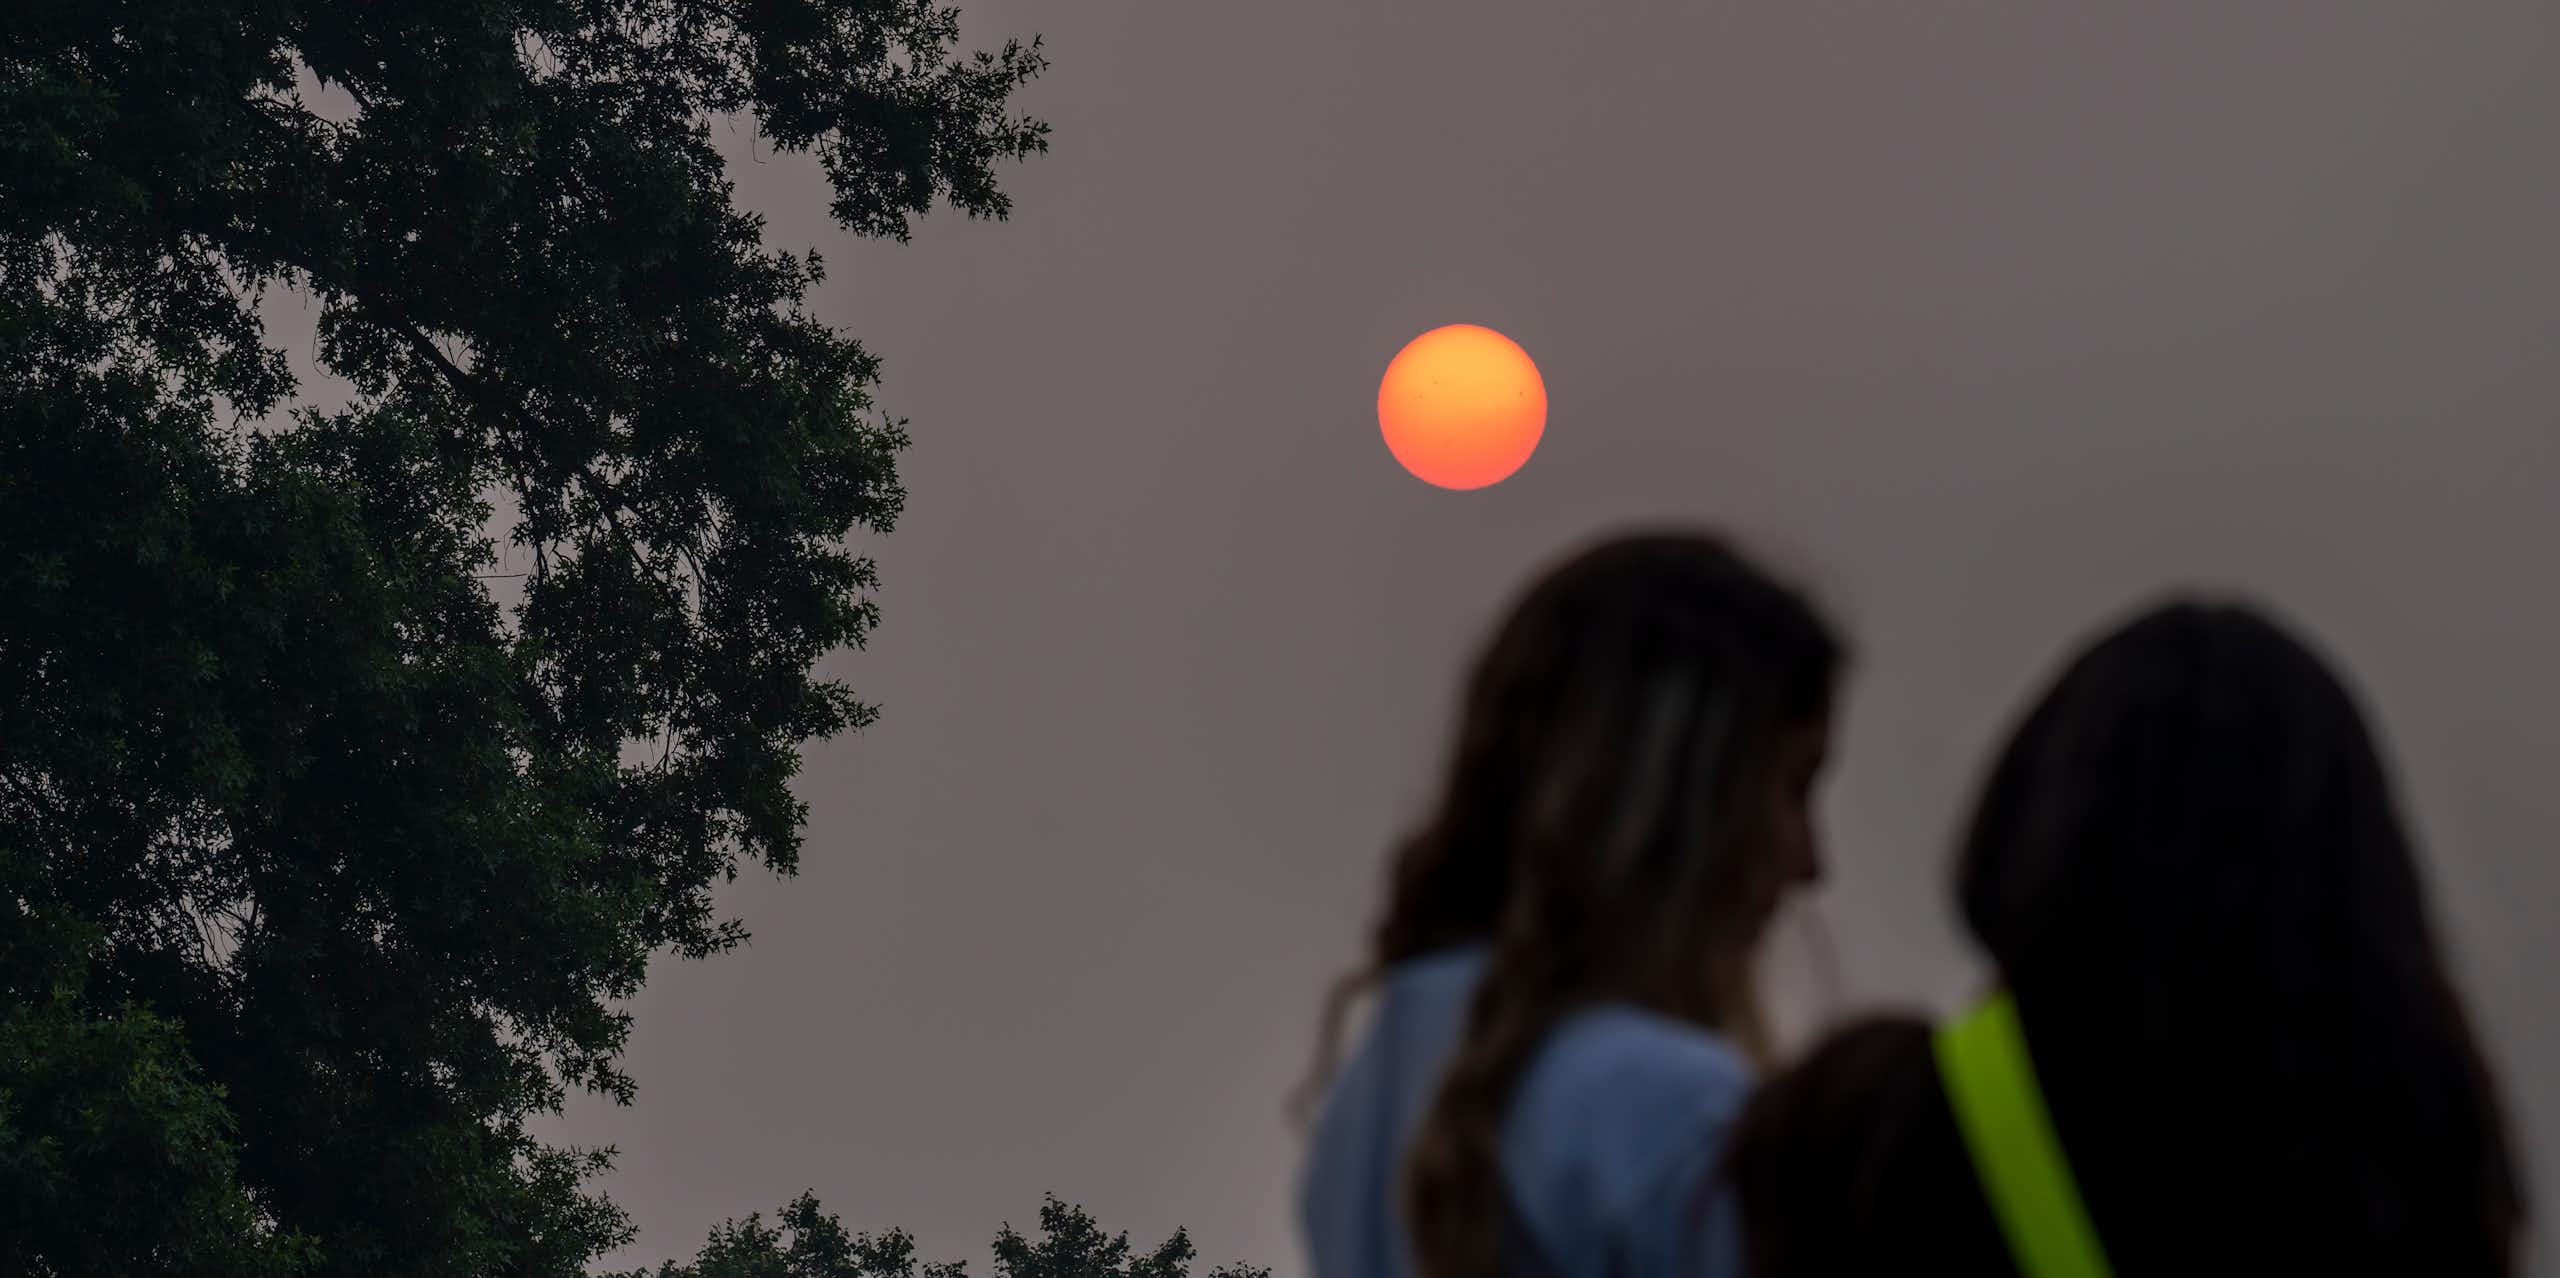 Two people stand under a sun obscured by haze.